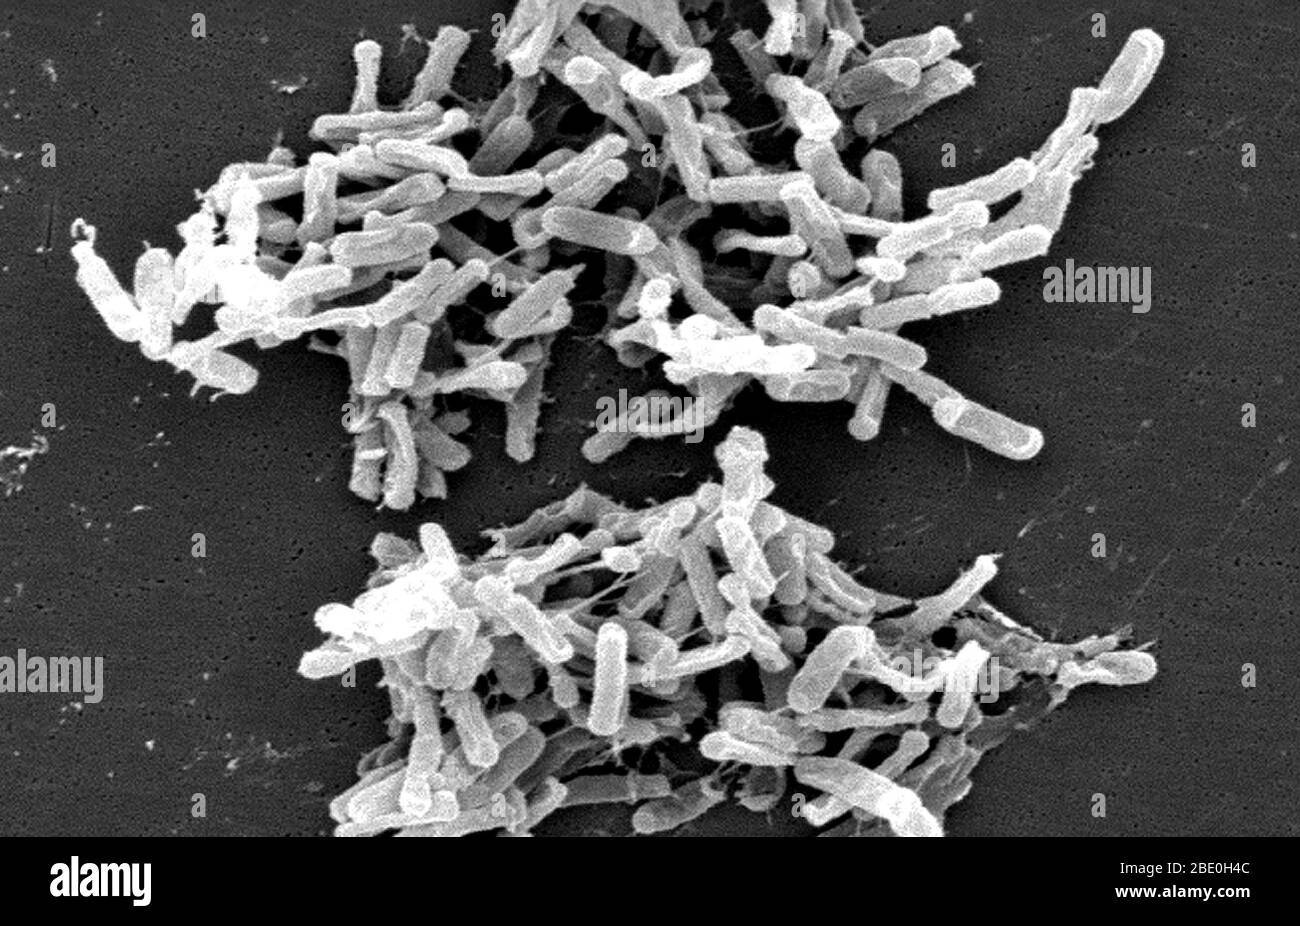 Scanning Electron Micrograph (SEM) showing Gram-positive Clostridium difficile bacteria. These C. difficile organisms were cultured from a stool sample obtained during an outbreak of gastrointestinal illness, and extracted using a .1µm filter. C. difficile causes diarrhea, and more serious intestinal conditions such as colitis. Stock Photo